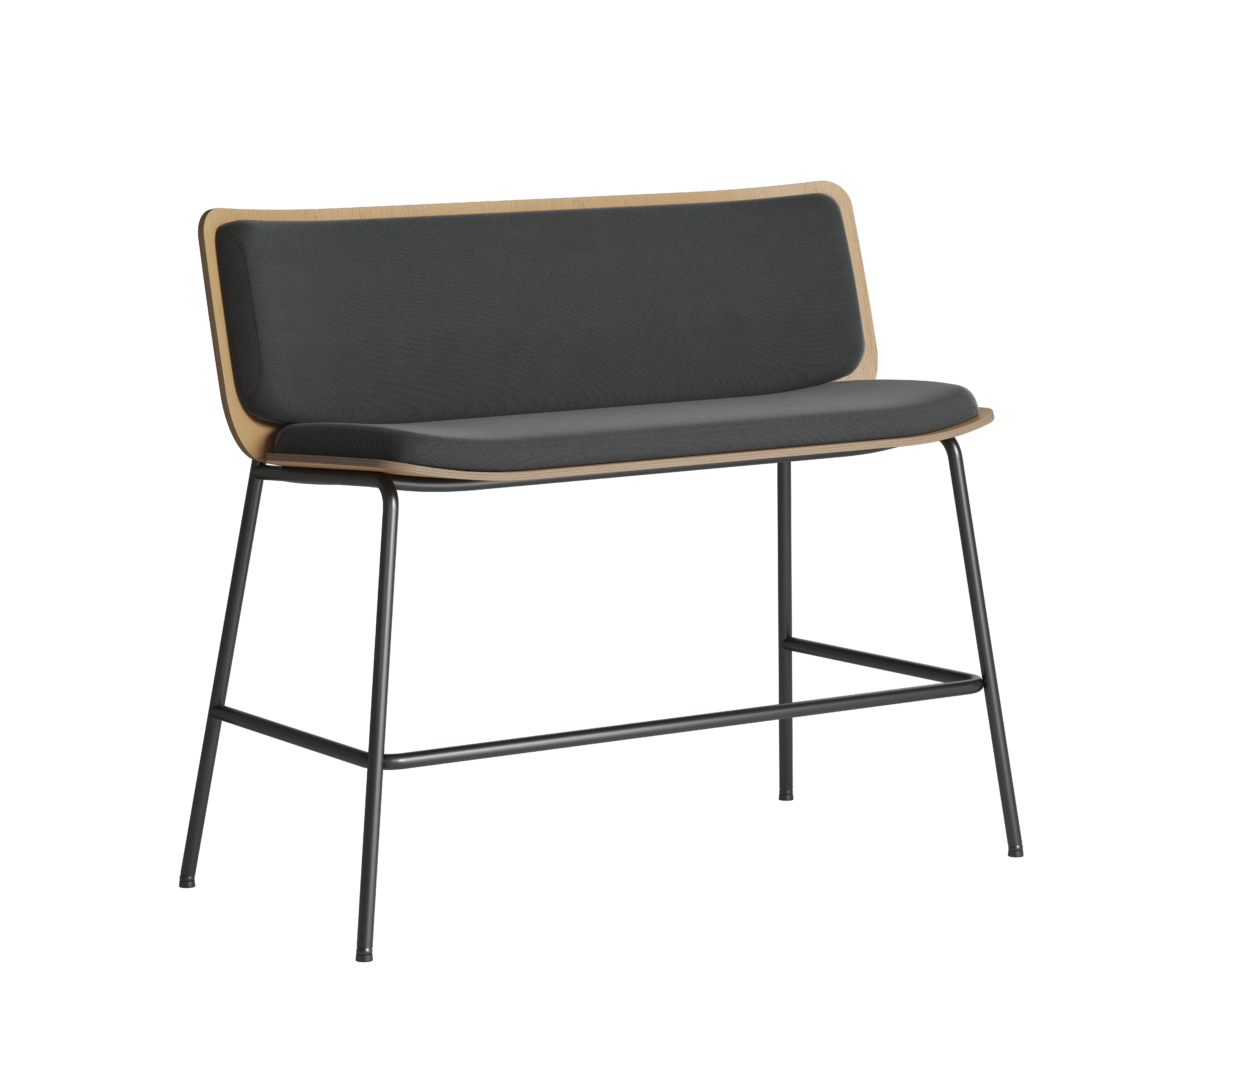 OCEE_FOUR – Stools _ Benches – FourAll Bench Inner Upholstery – Packshot Image 1